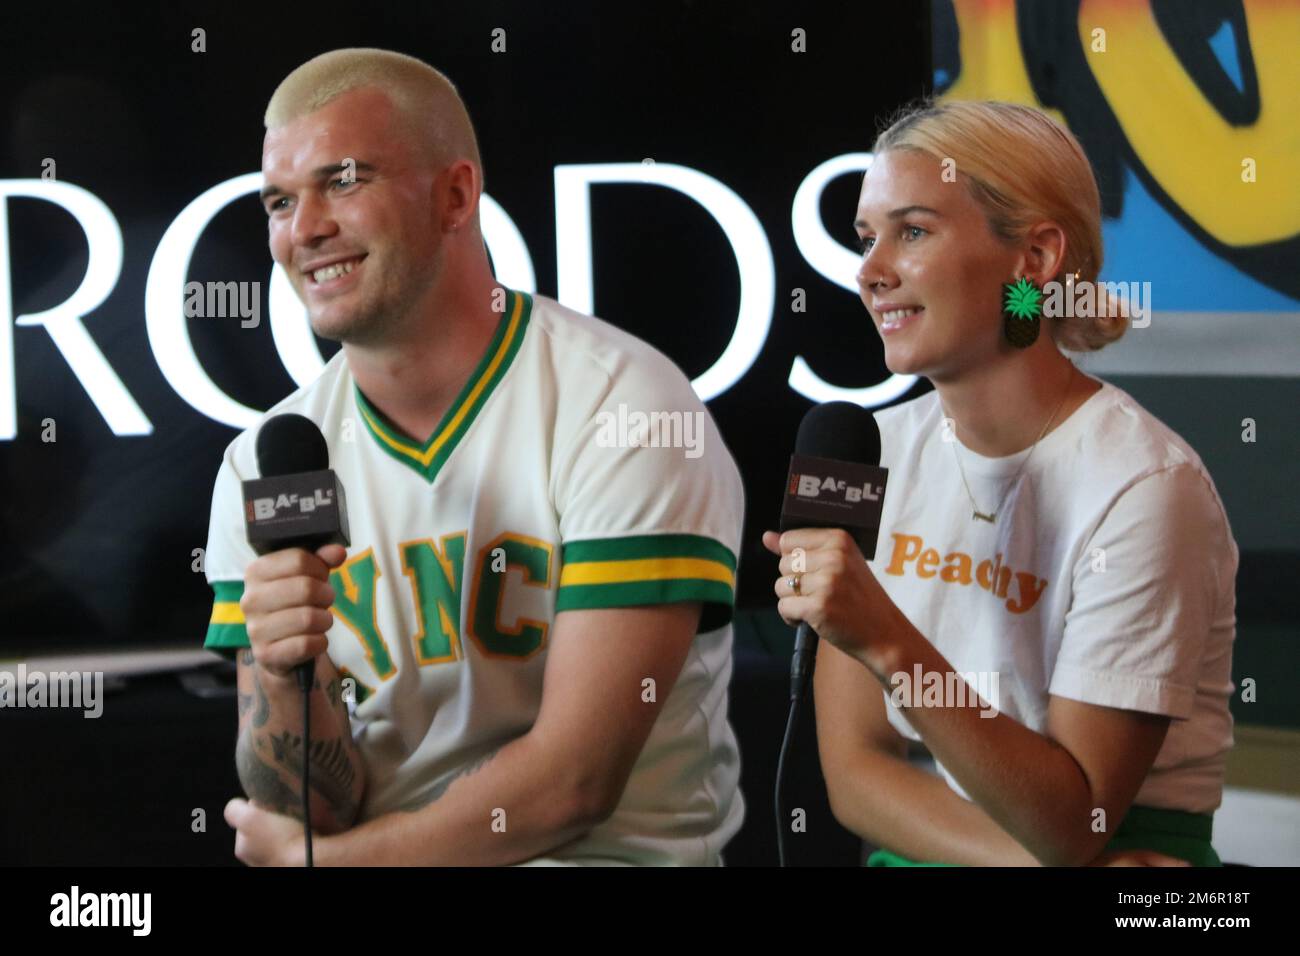 Broods - Georgia and Caleb Nott fiming an interview in New York Stock Photo